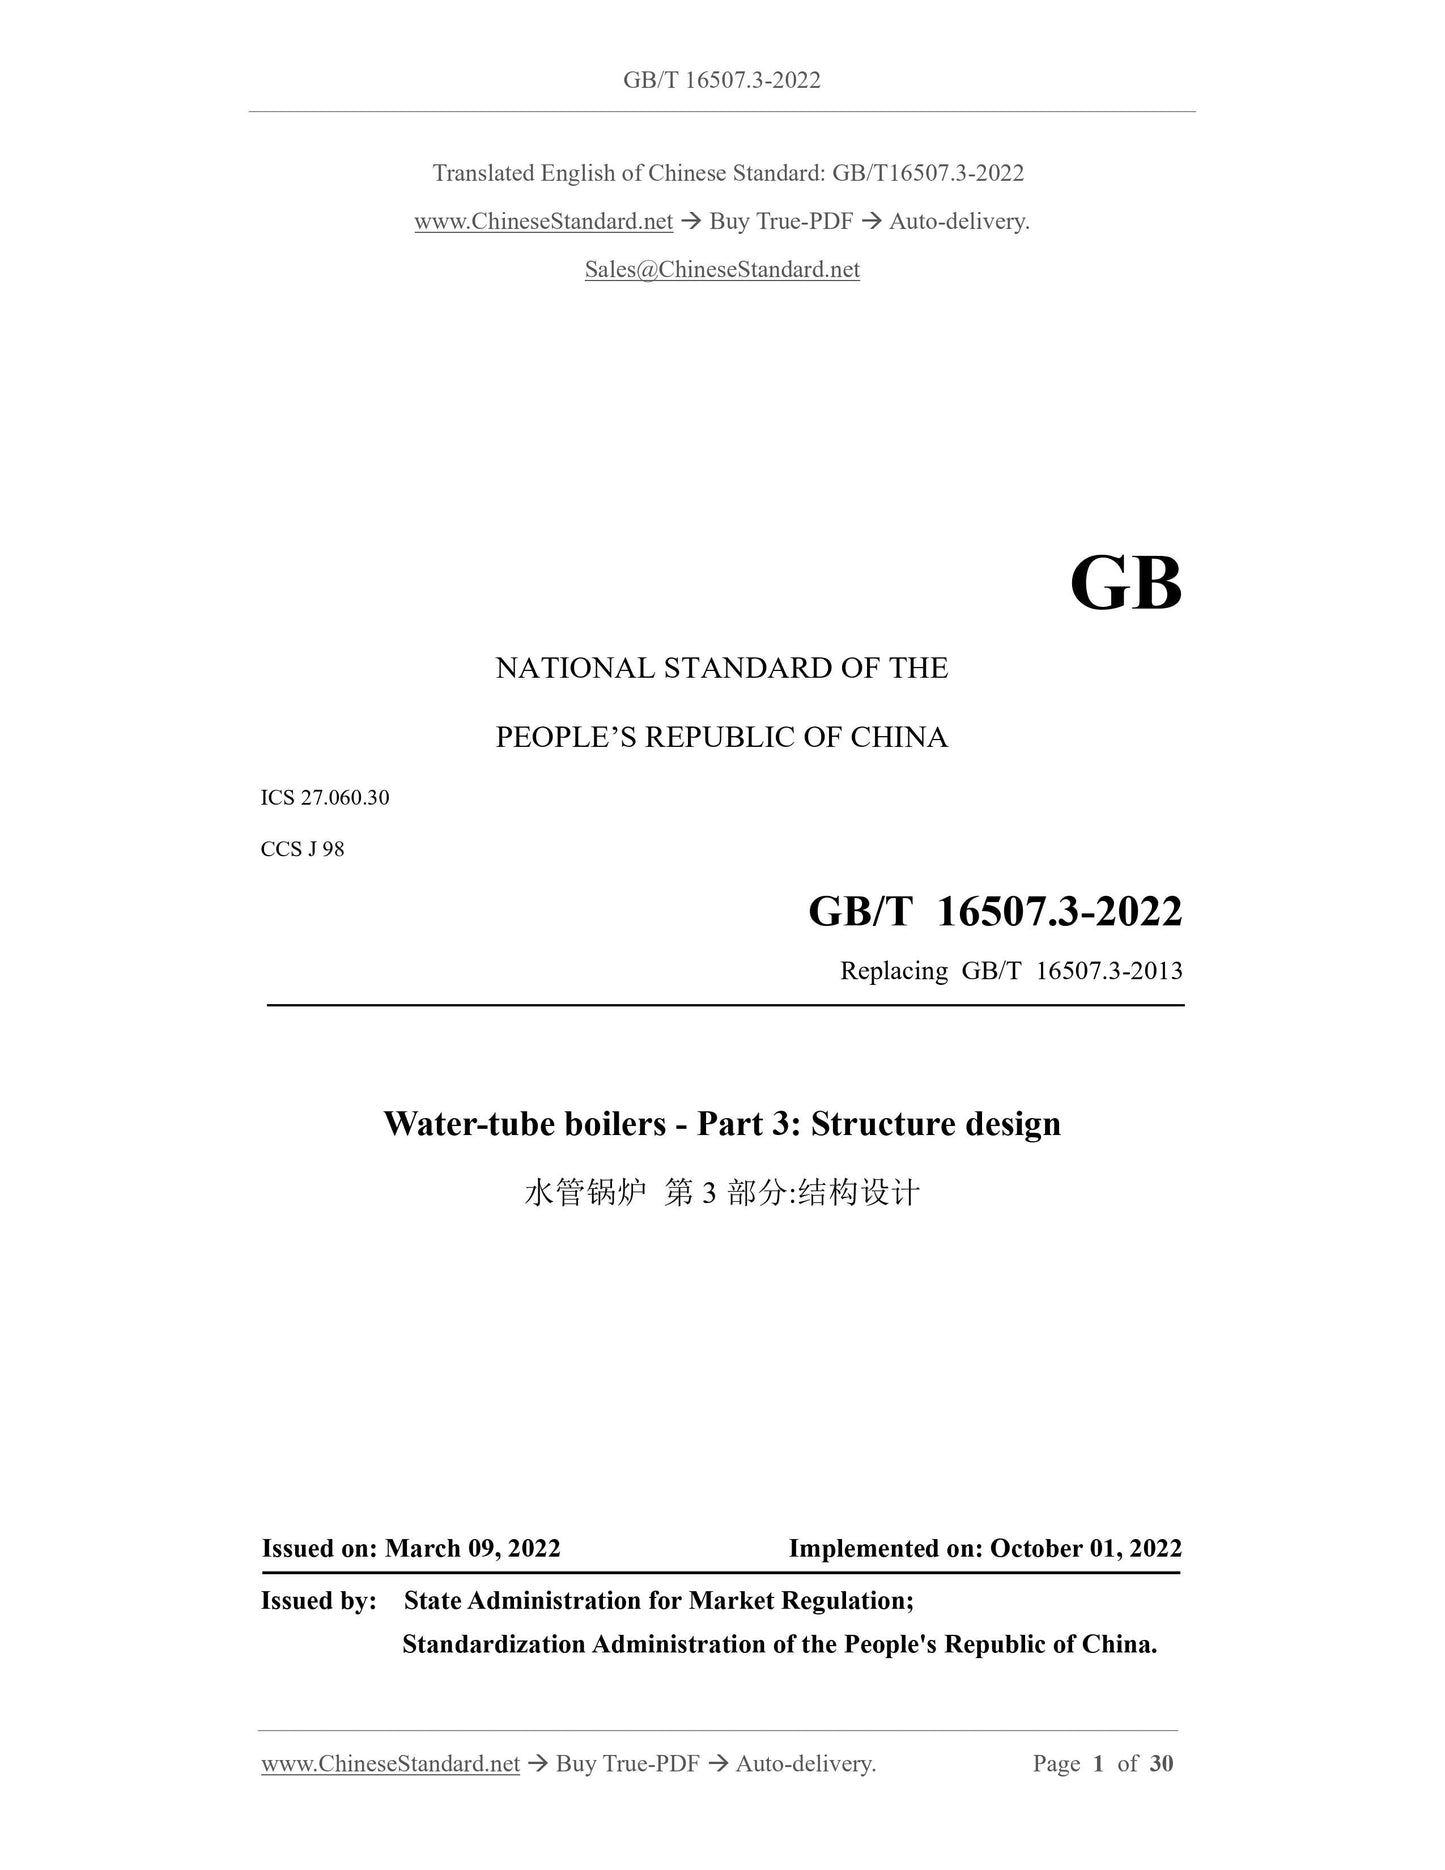 GB/T 16507.3-2022 Page 1